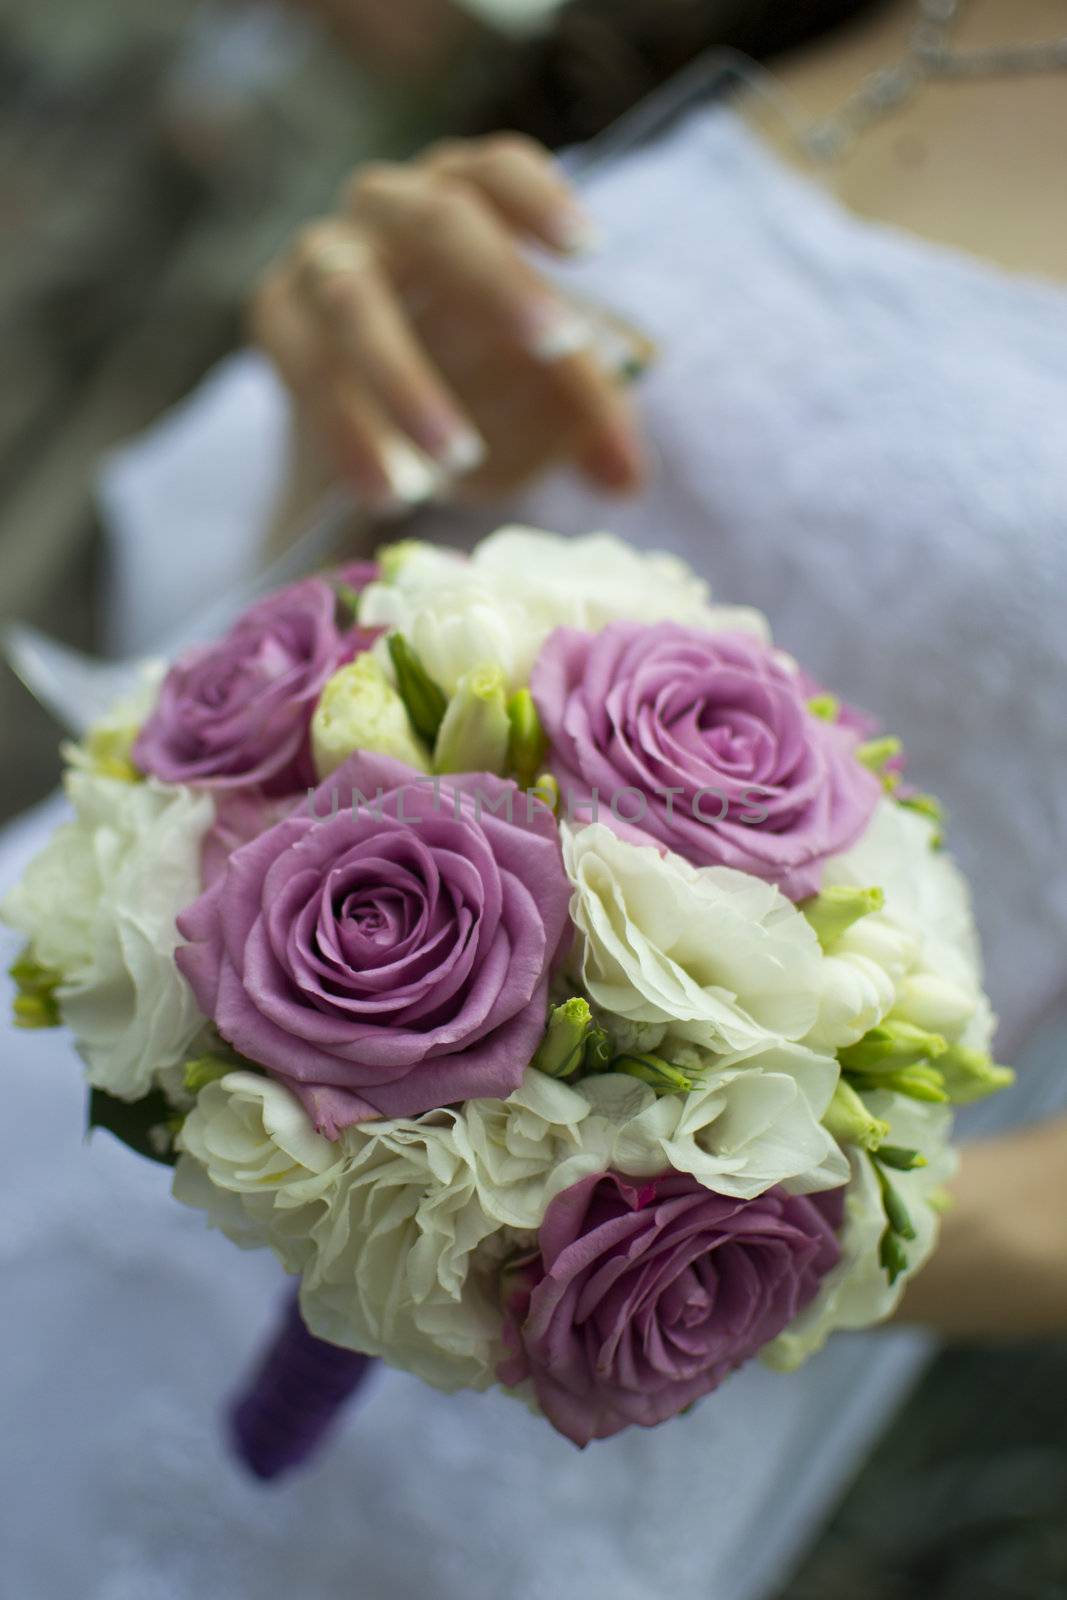 An elegant hand-tied bouquet of flowers in the hand of a bride. by only4denn